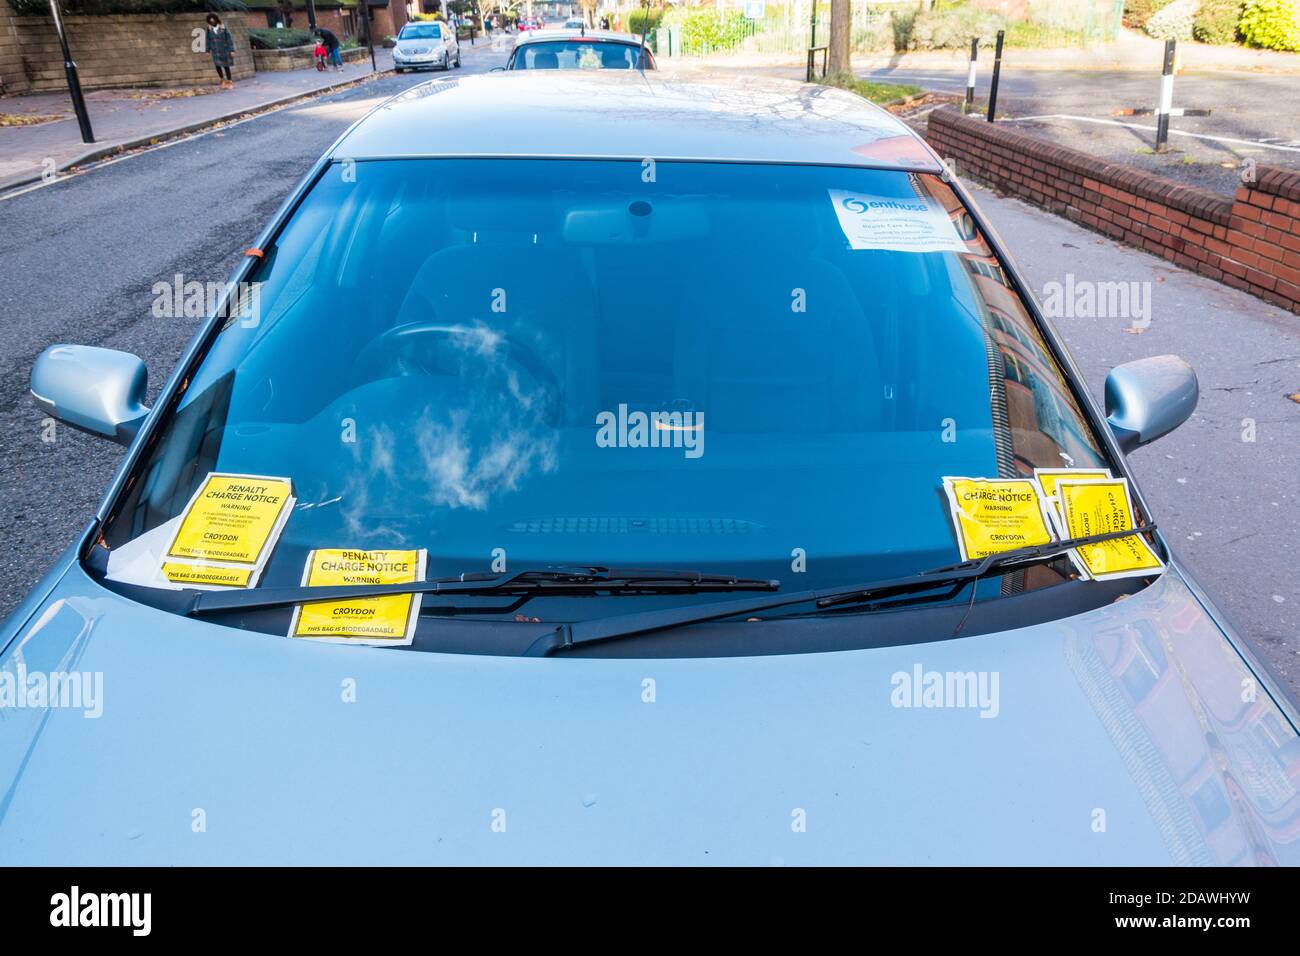 Parking fine notice Penalty charge notice on car windshield Stock Photo